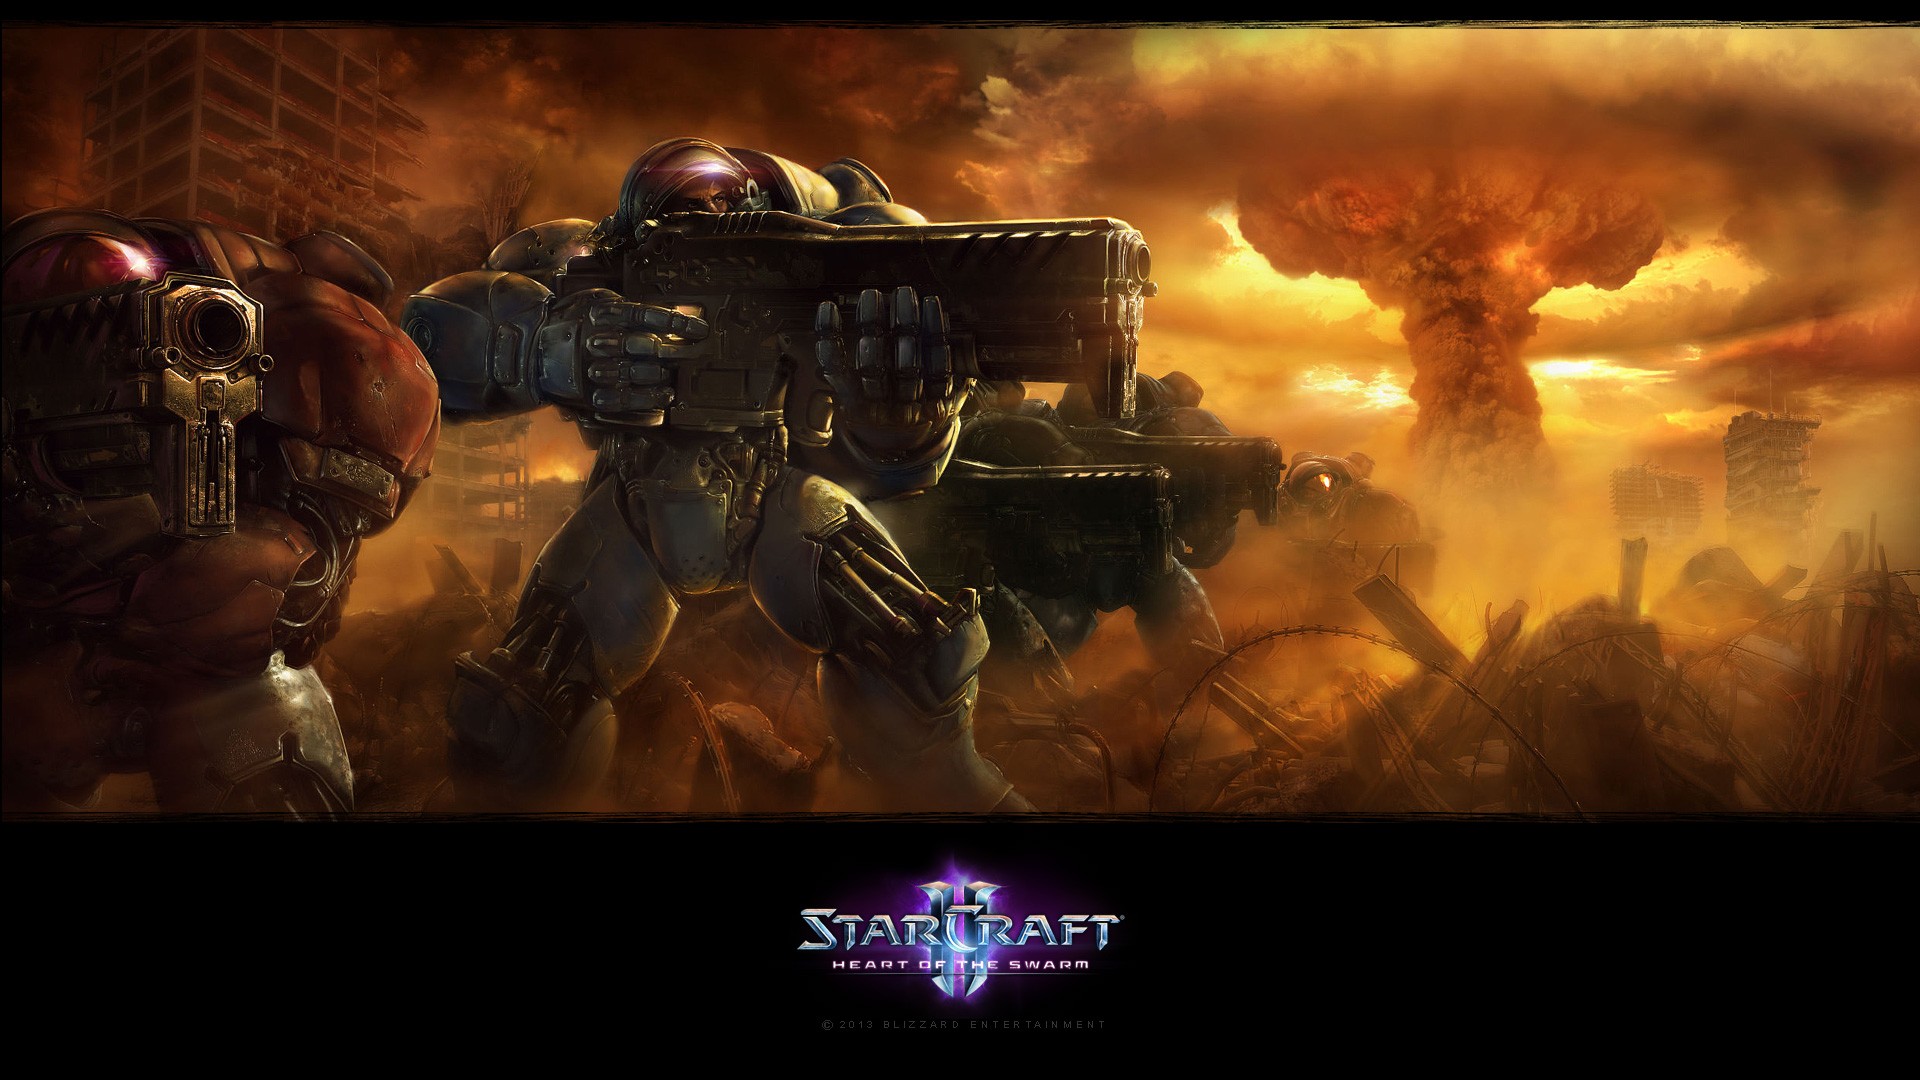 Starcraft II, Video Games Wallpapers HD / Desktop and Mobile Backgrounds